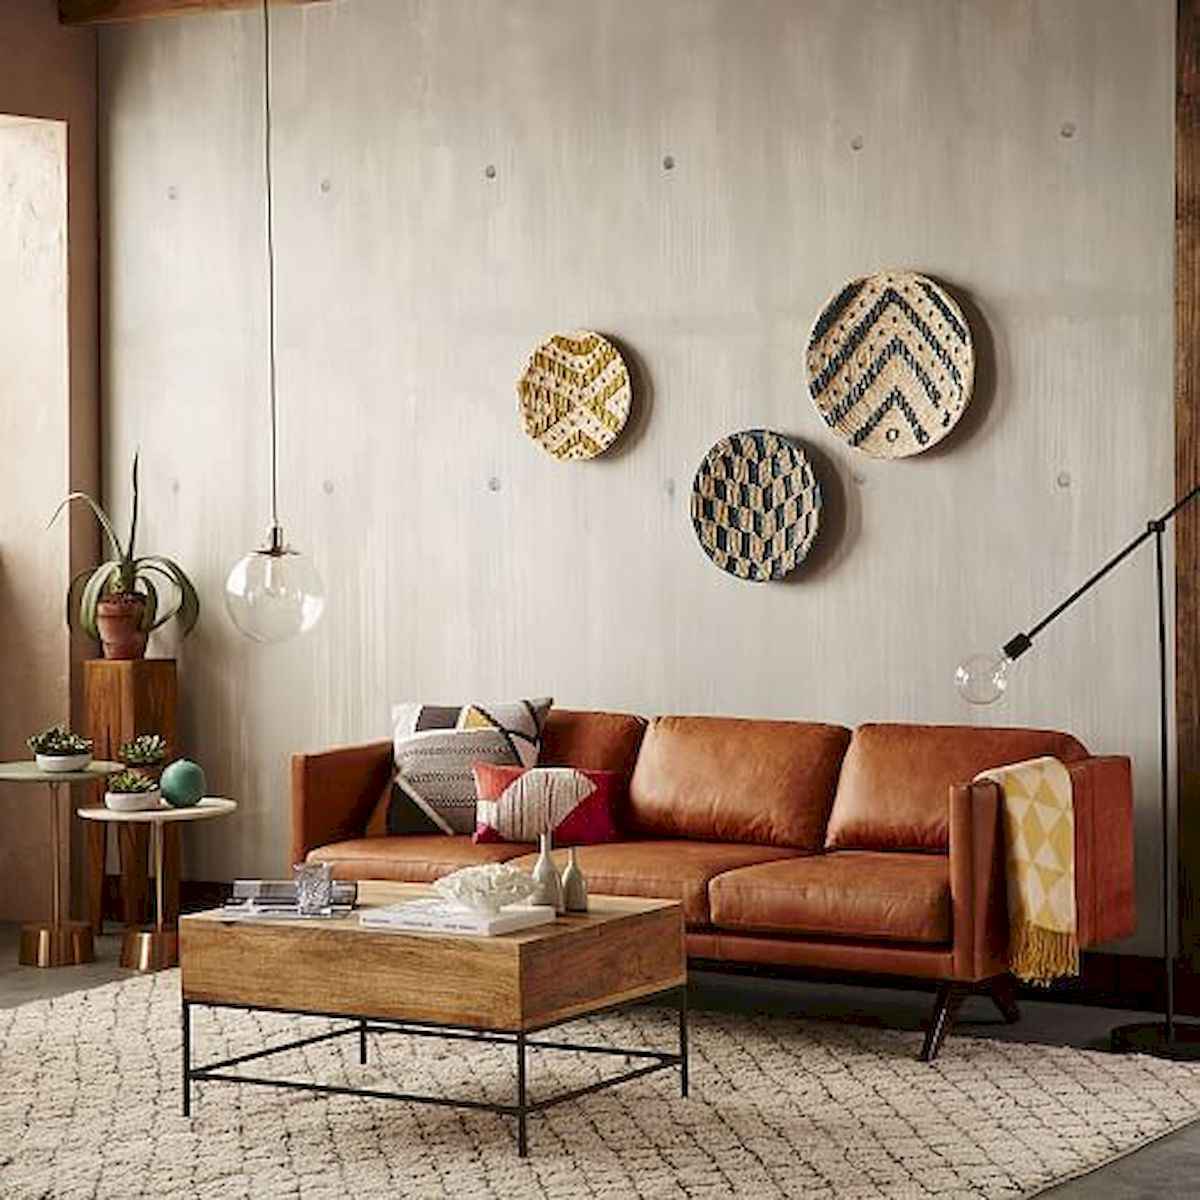 25 Gorgeous Industrial Living Room Ideas for 2020